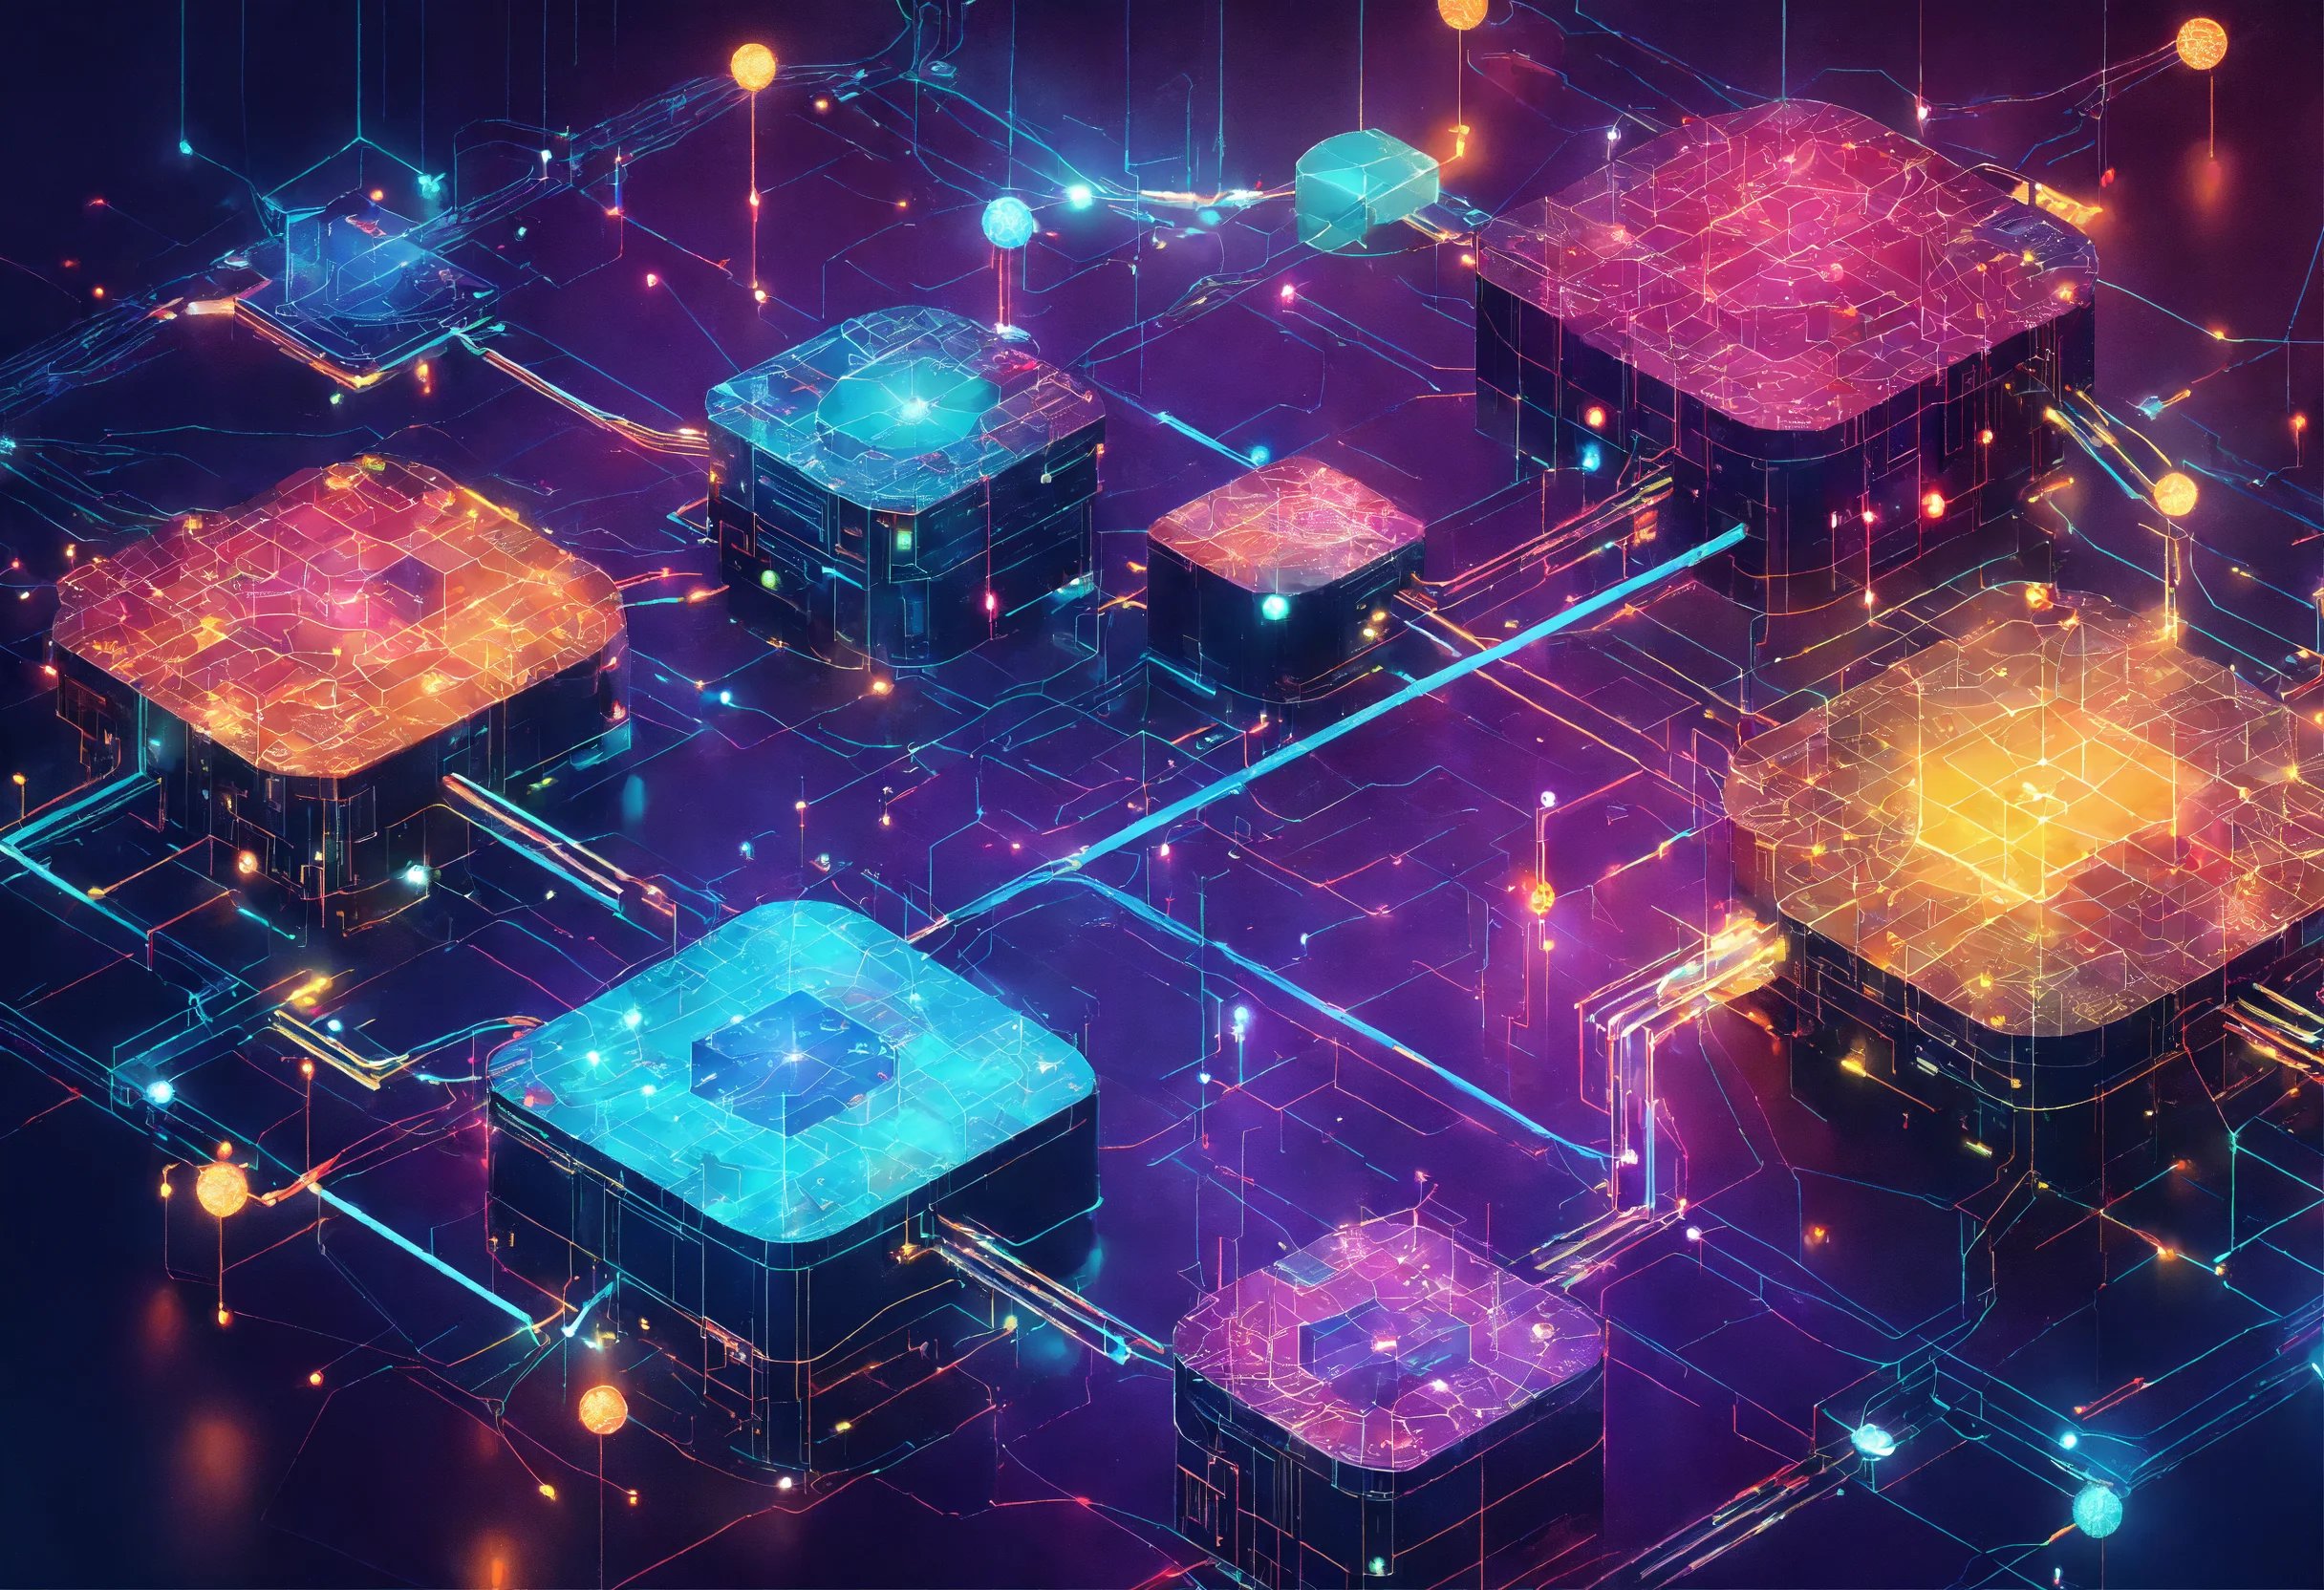 Interconnected nodes, with some holding puzzle pieces to represent data chunks and others with colored pieces for parity chunks. Safety net beneath the puzzle pieces to symbolize data protection and recovery, set against a digital, tech-themed background.